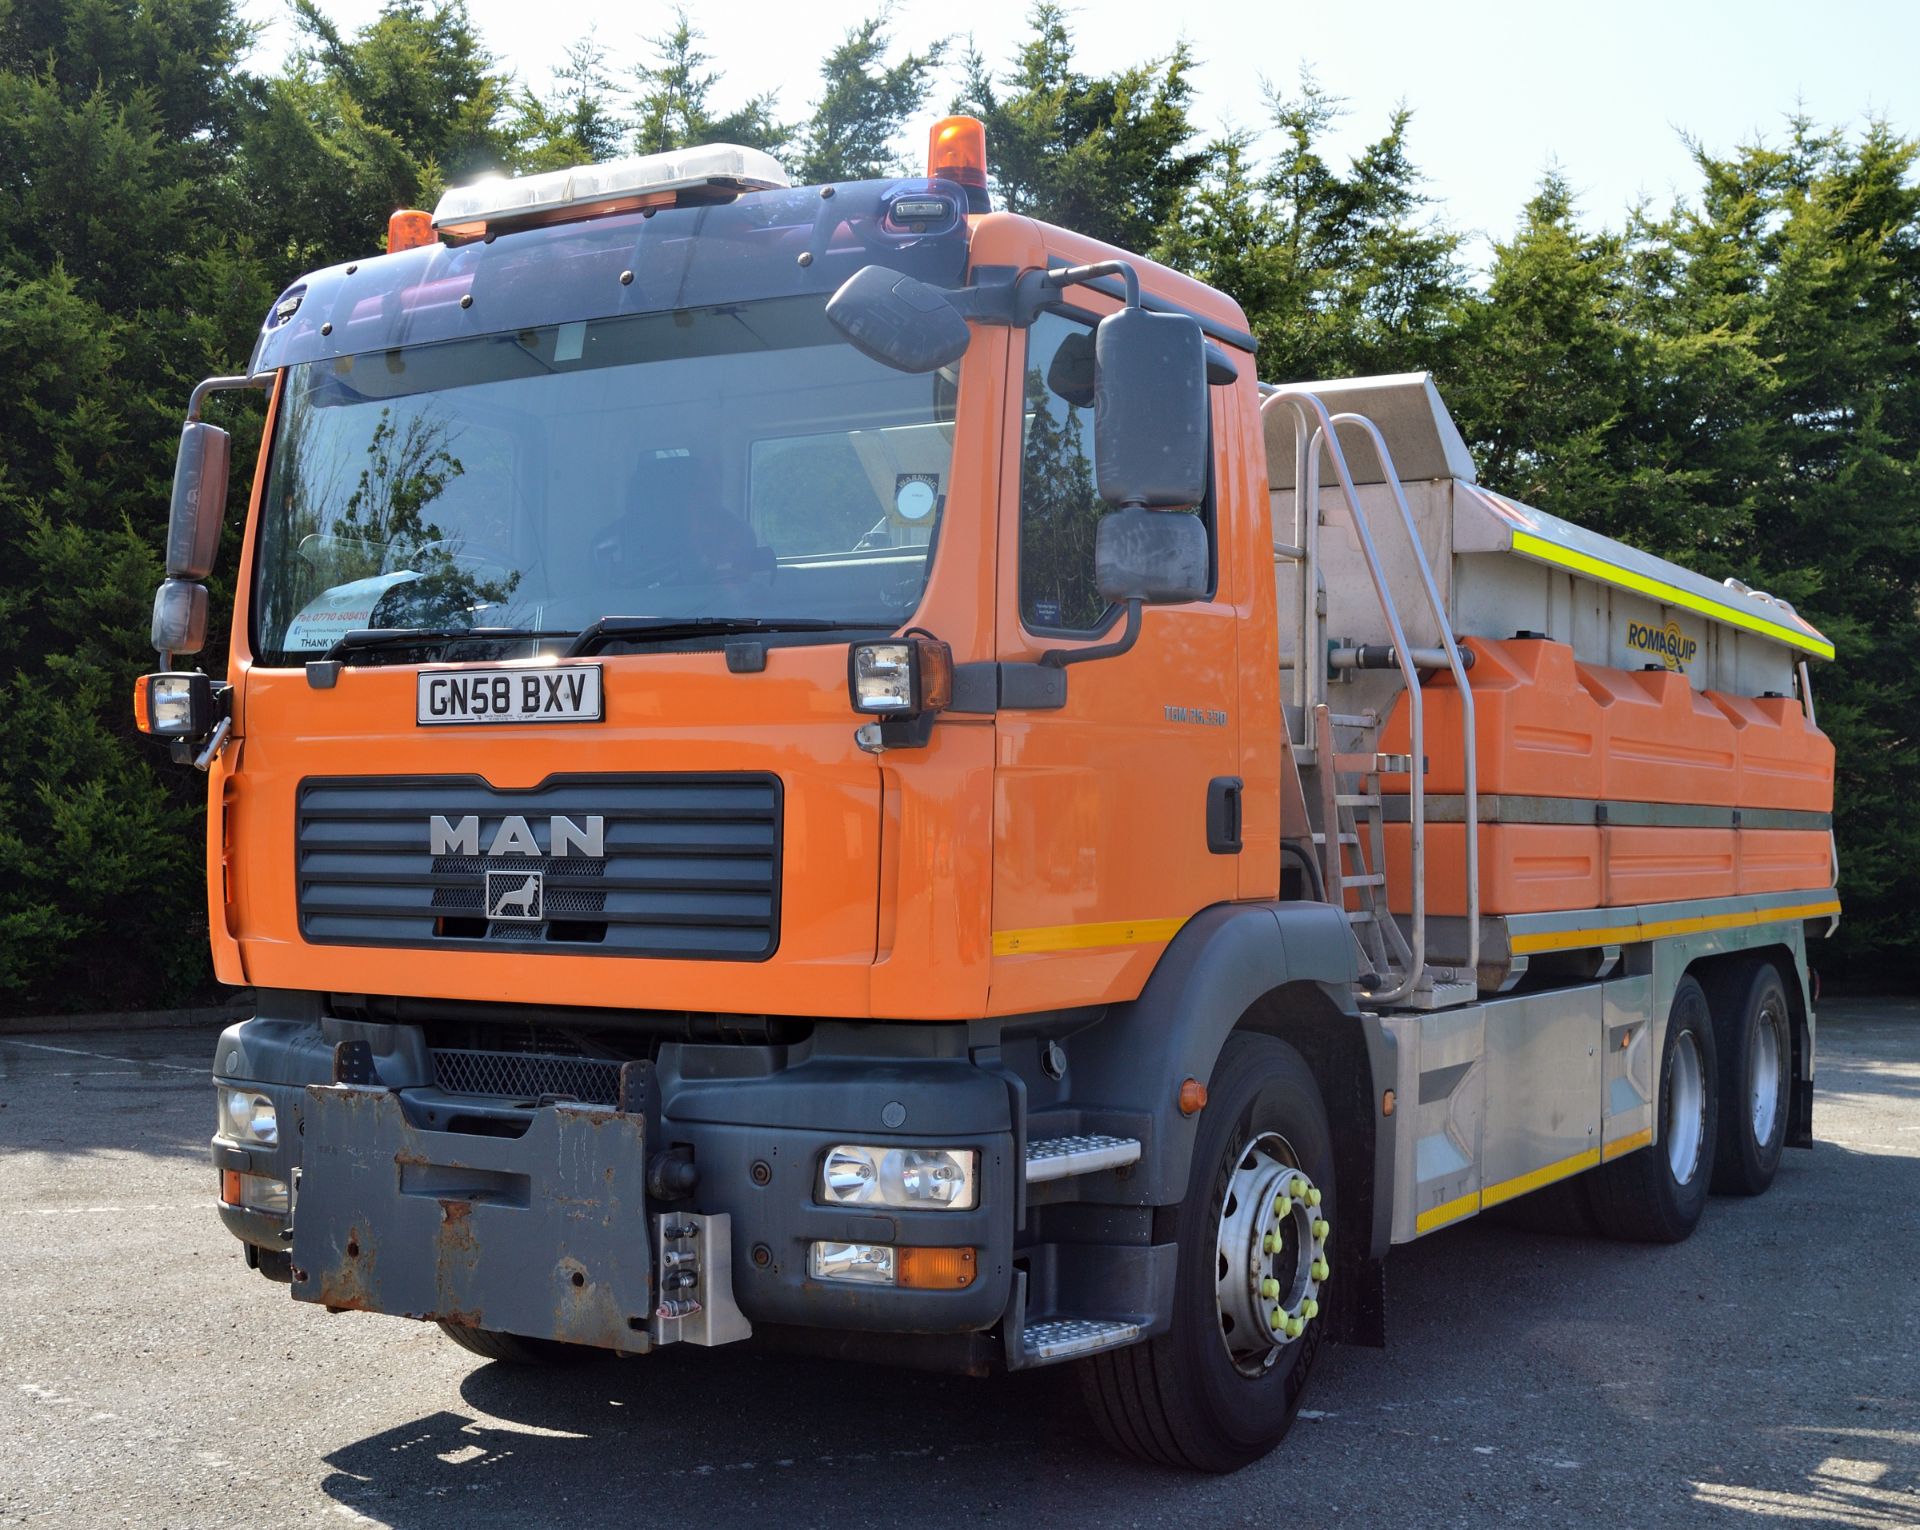 2008 (reg GN58 BXV) MAN TGM 26.330 6x4 with Romaquip 10m3 pre-wet gritter mount and 3m snow plough